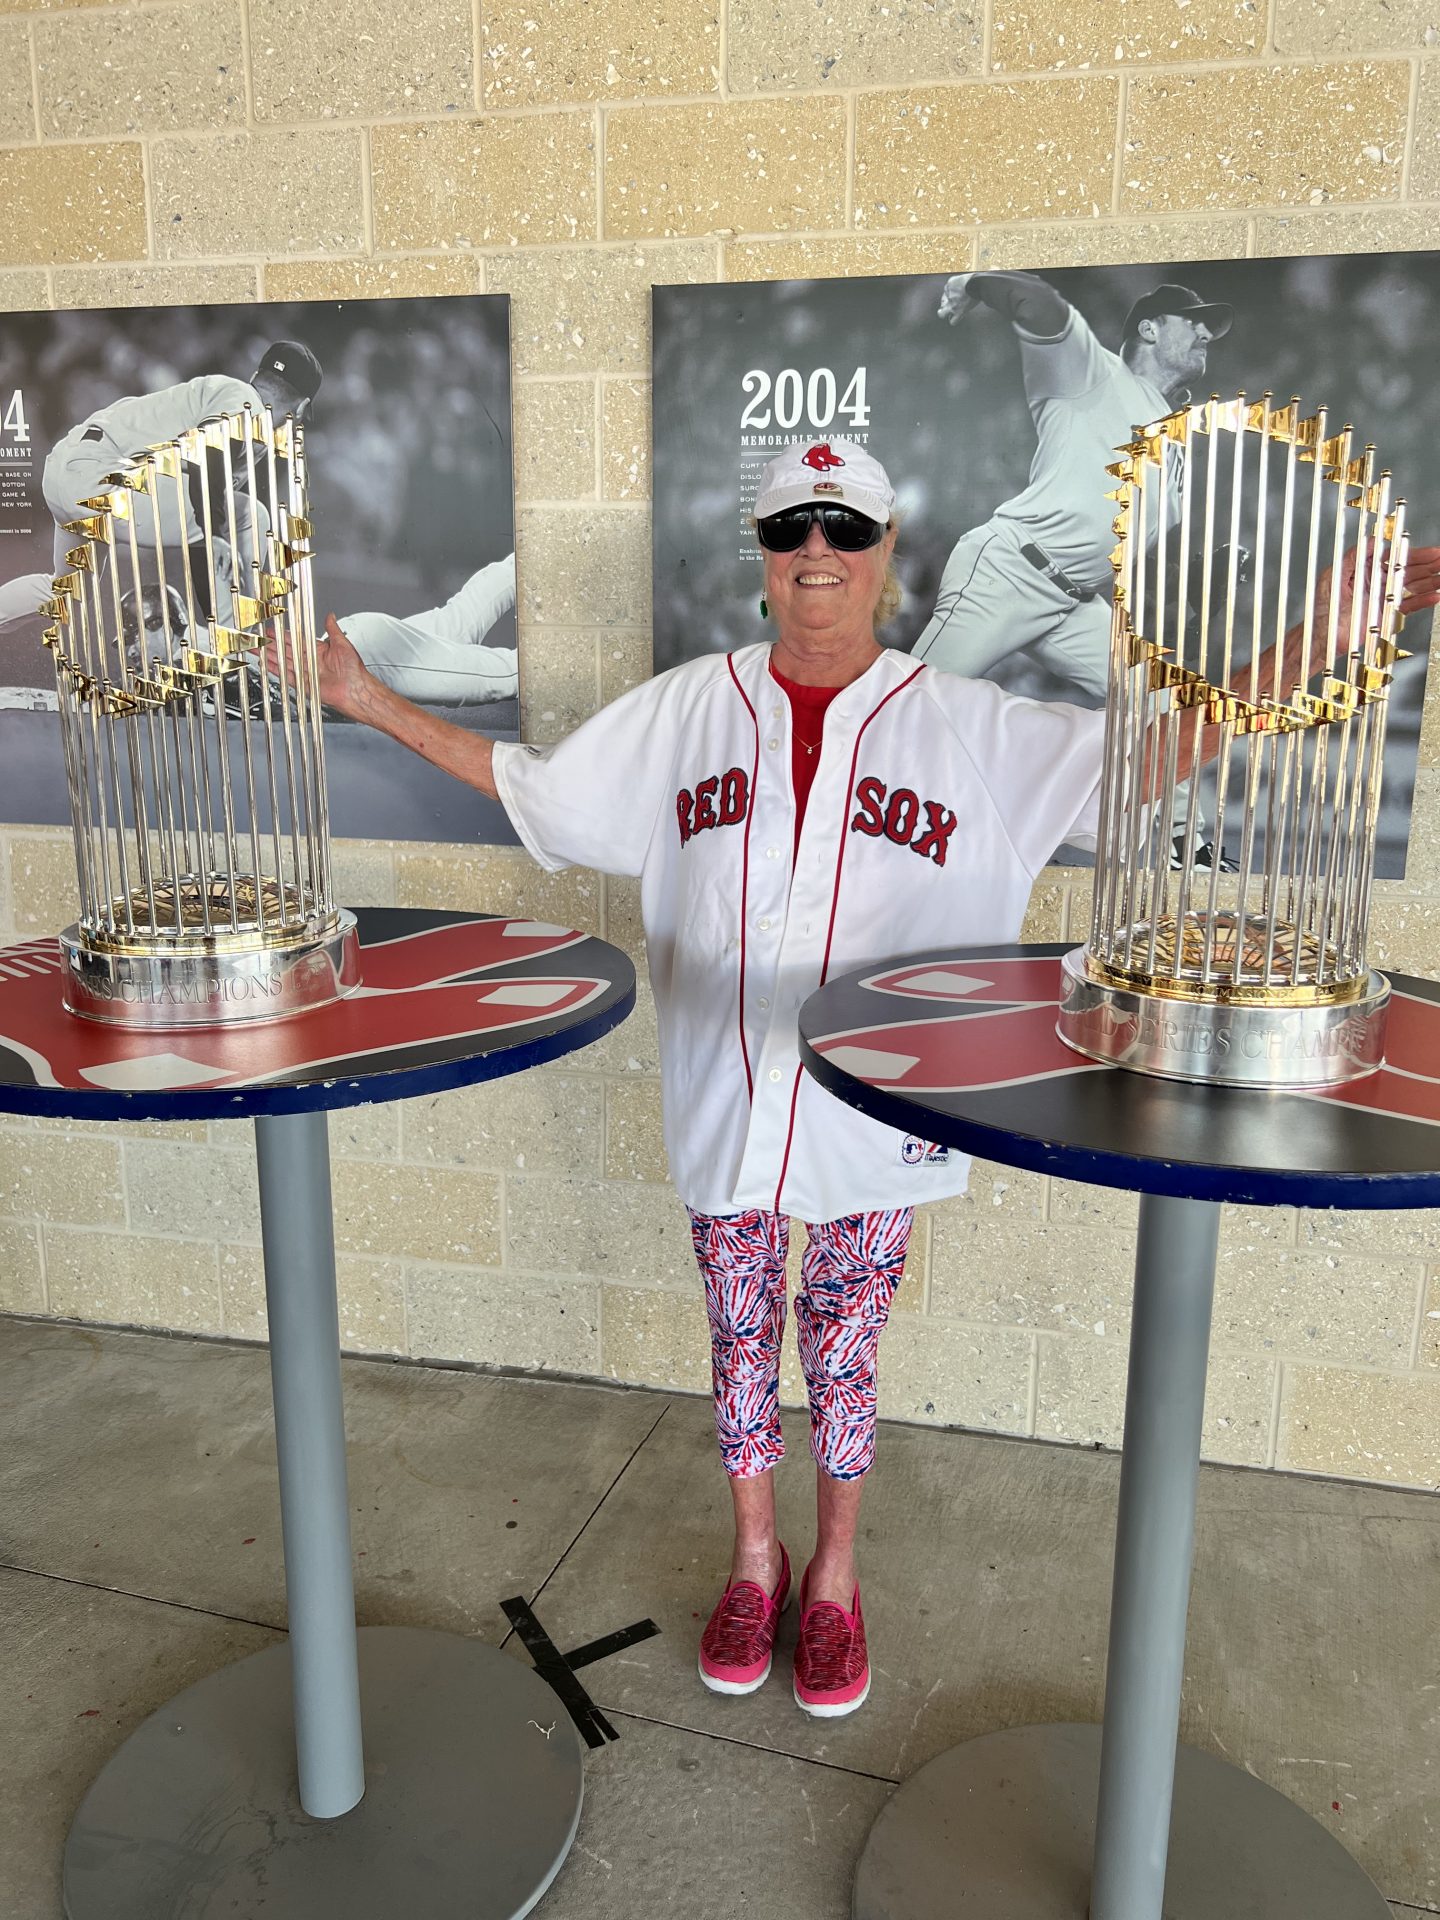 What a fun time we had at the Red Sox game last year. <br />
Miss you Luanne…  with love from another Boston gal… ❤️